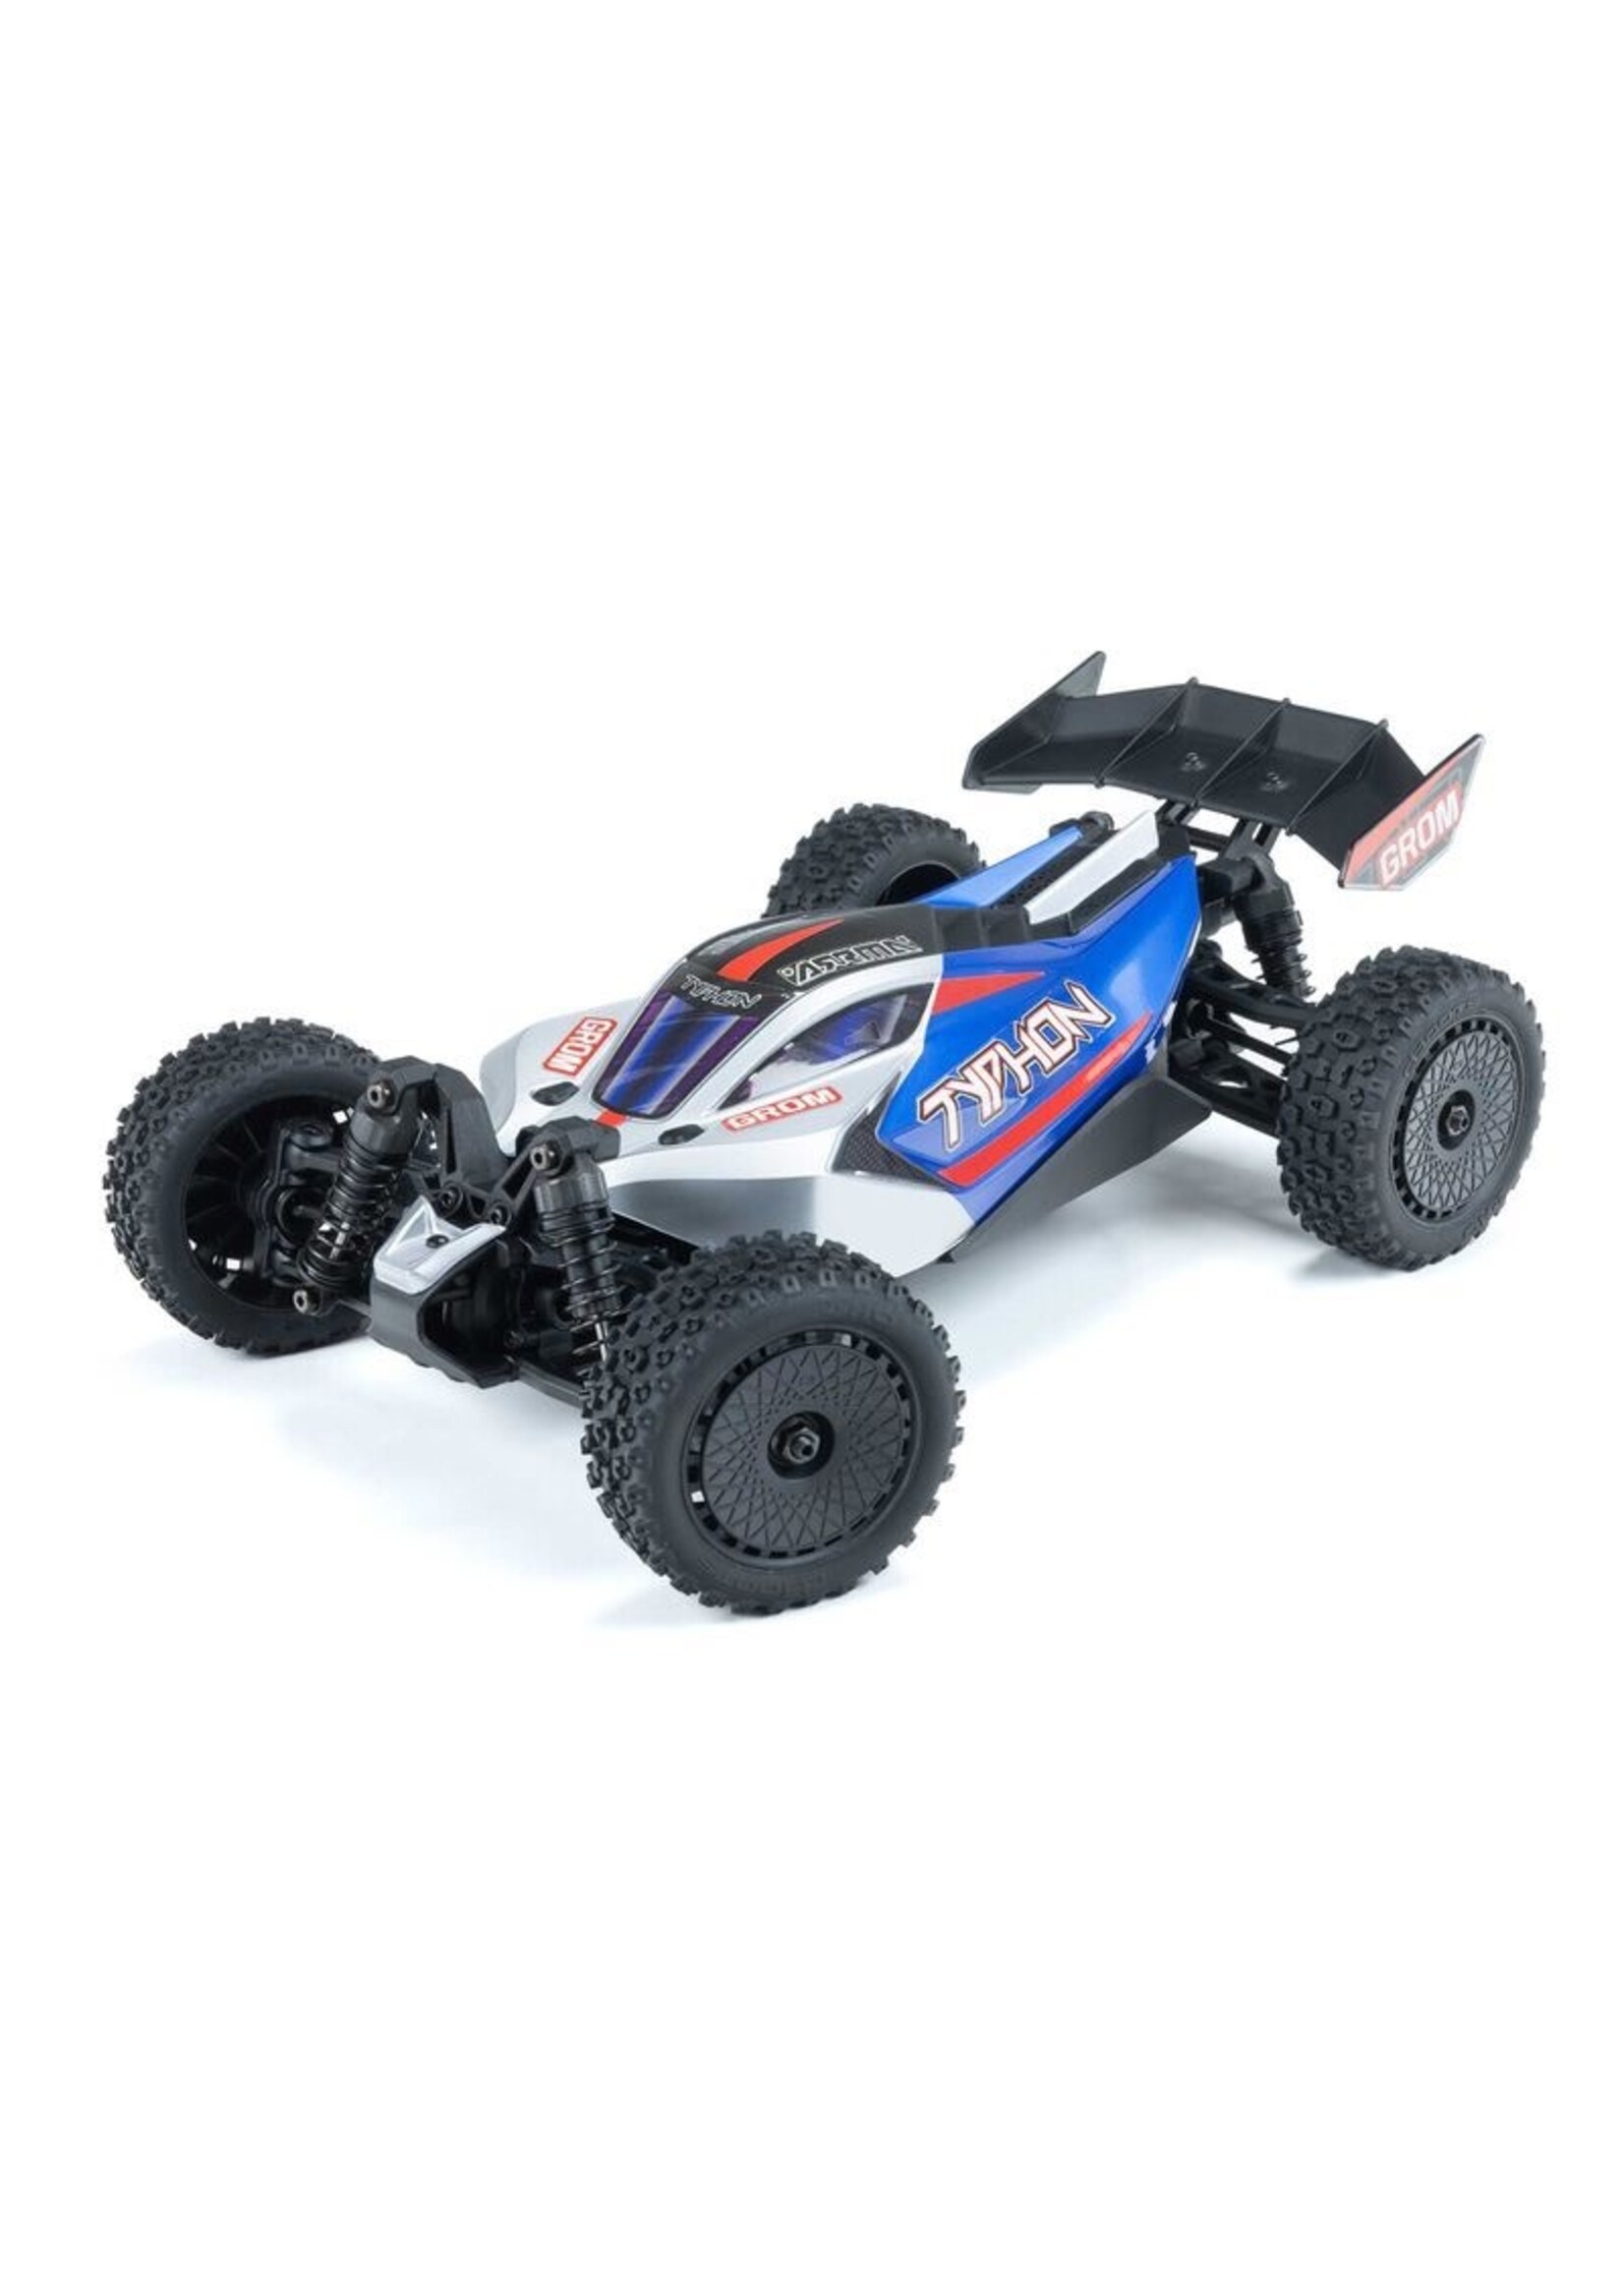 ARRMA ARA2106T1 TYPHON GROM MEGA 380 Brushed 4X4 Small Scale Buggy RTR with Battery & Charger, Blue/Silver